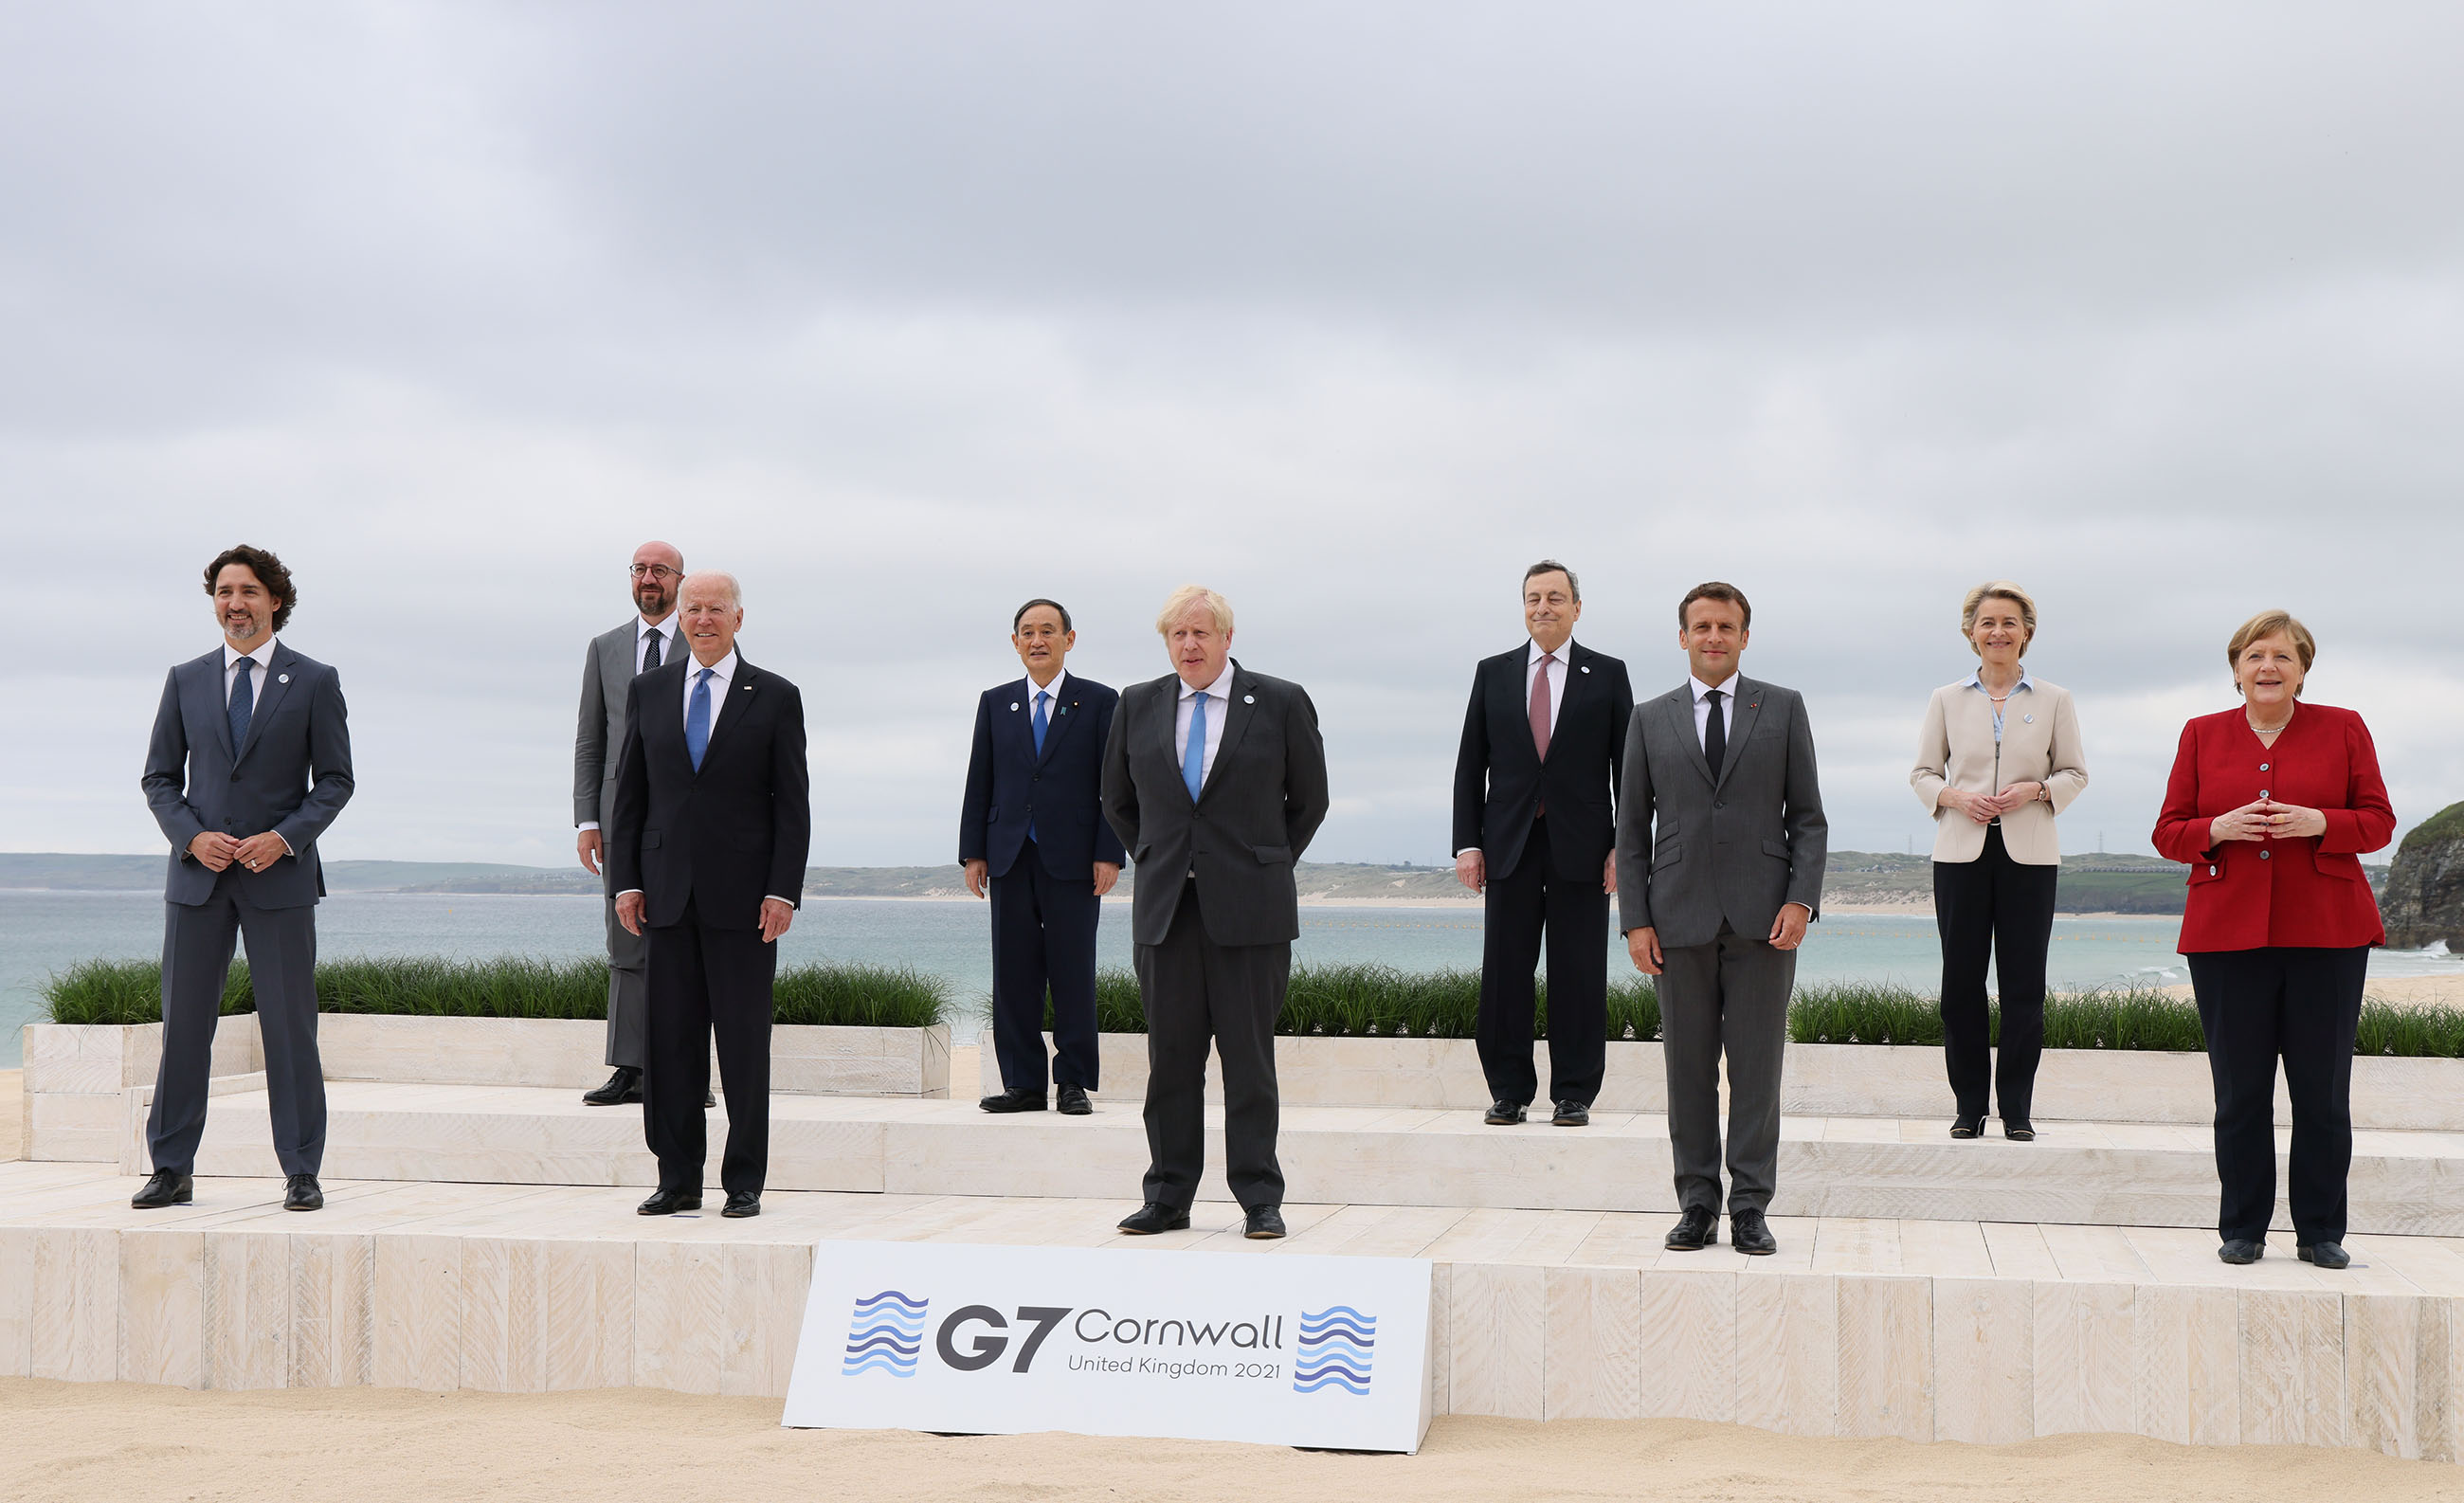 Photograph of the group photograph session with the leaders of the G7 members (1)